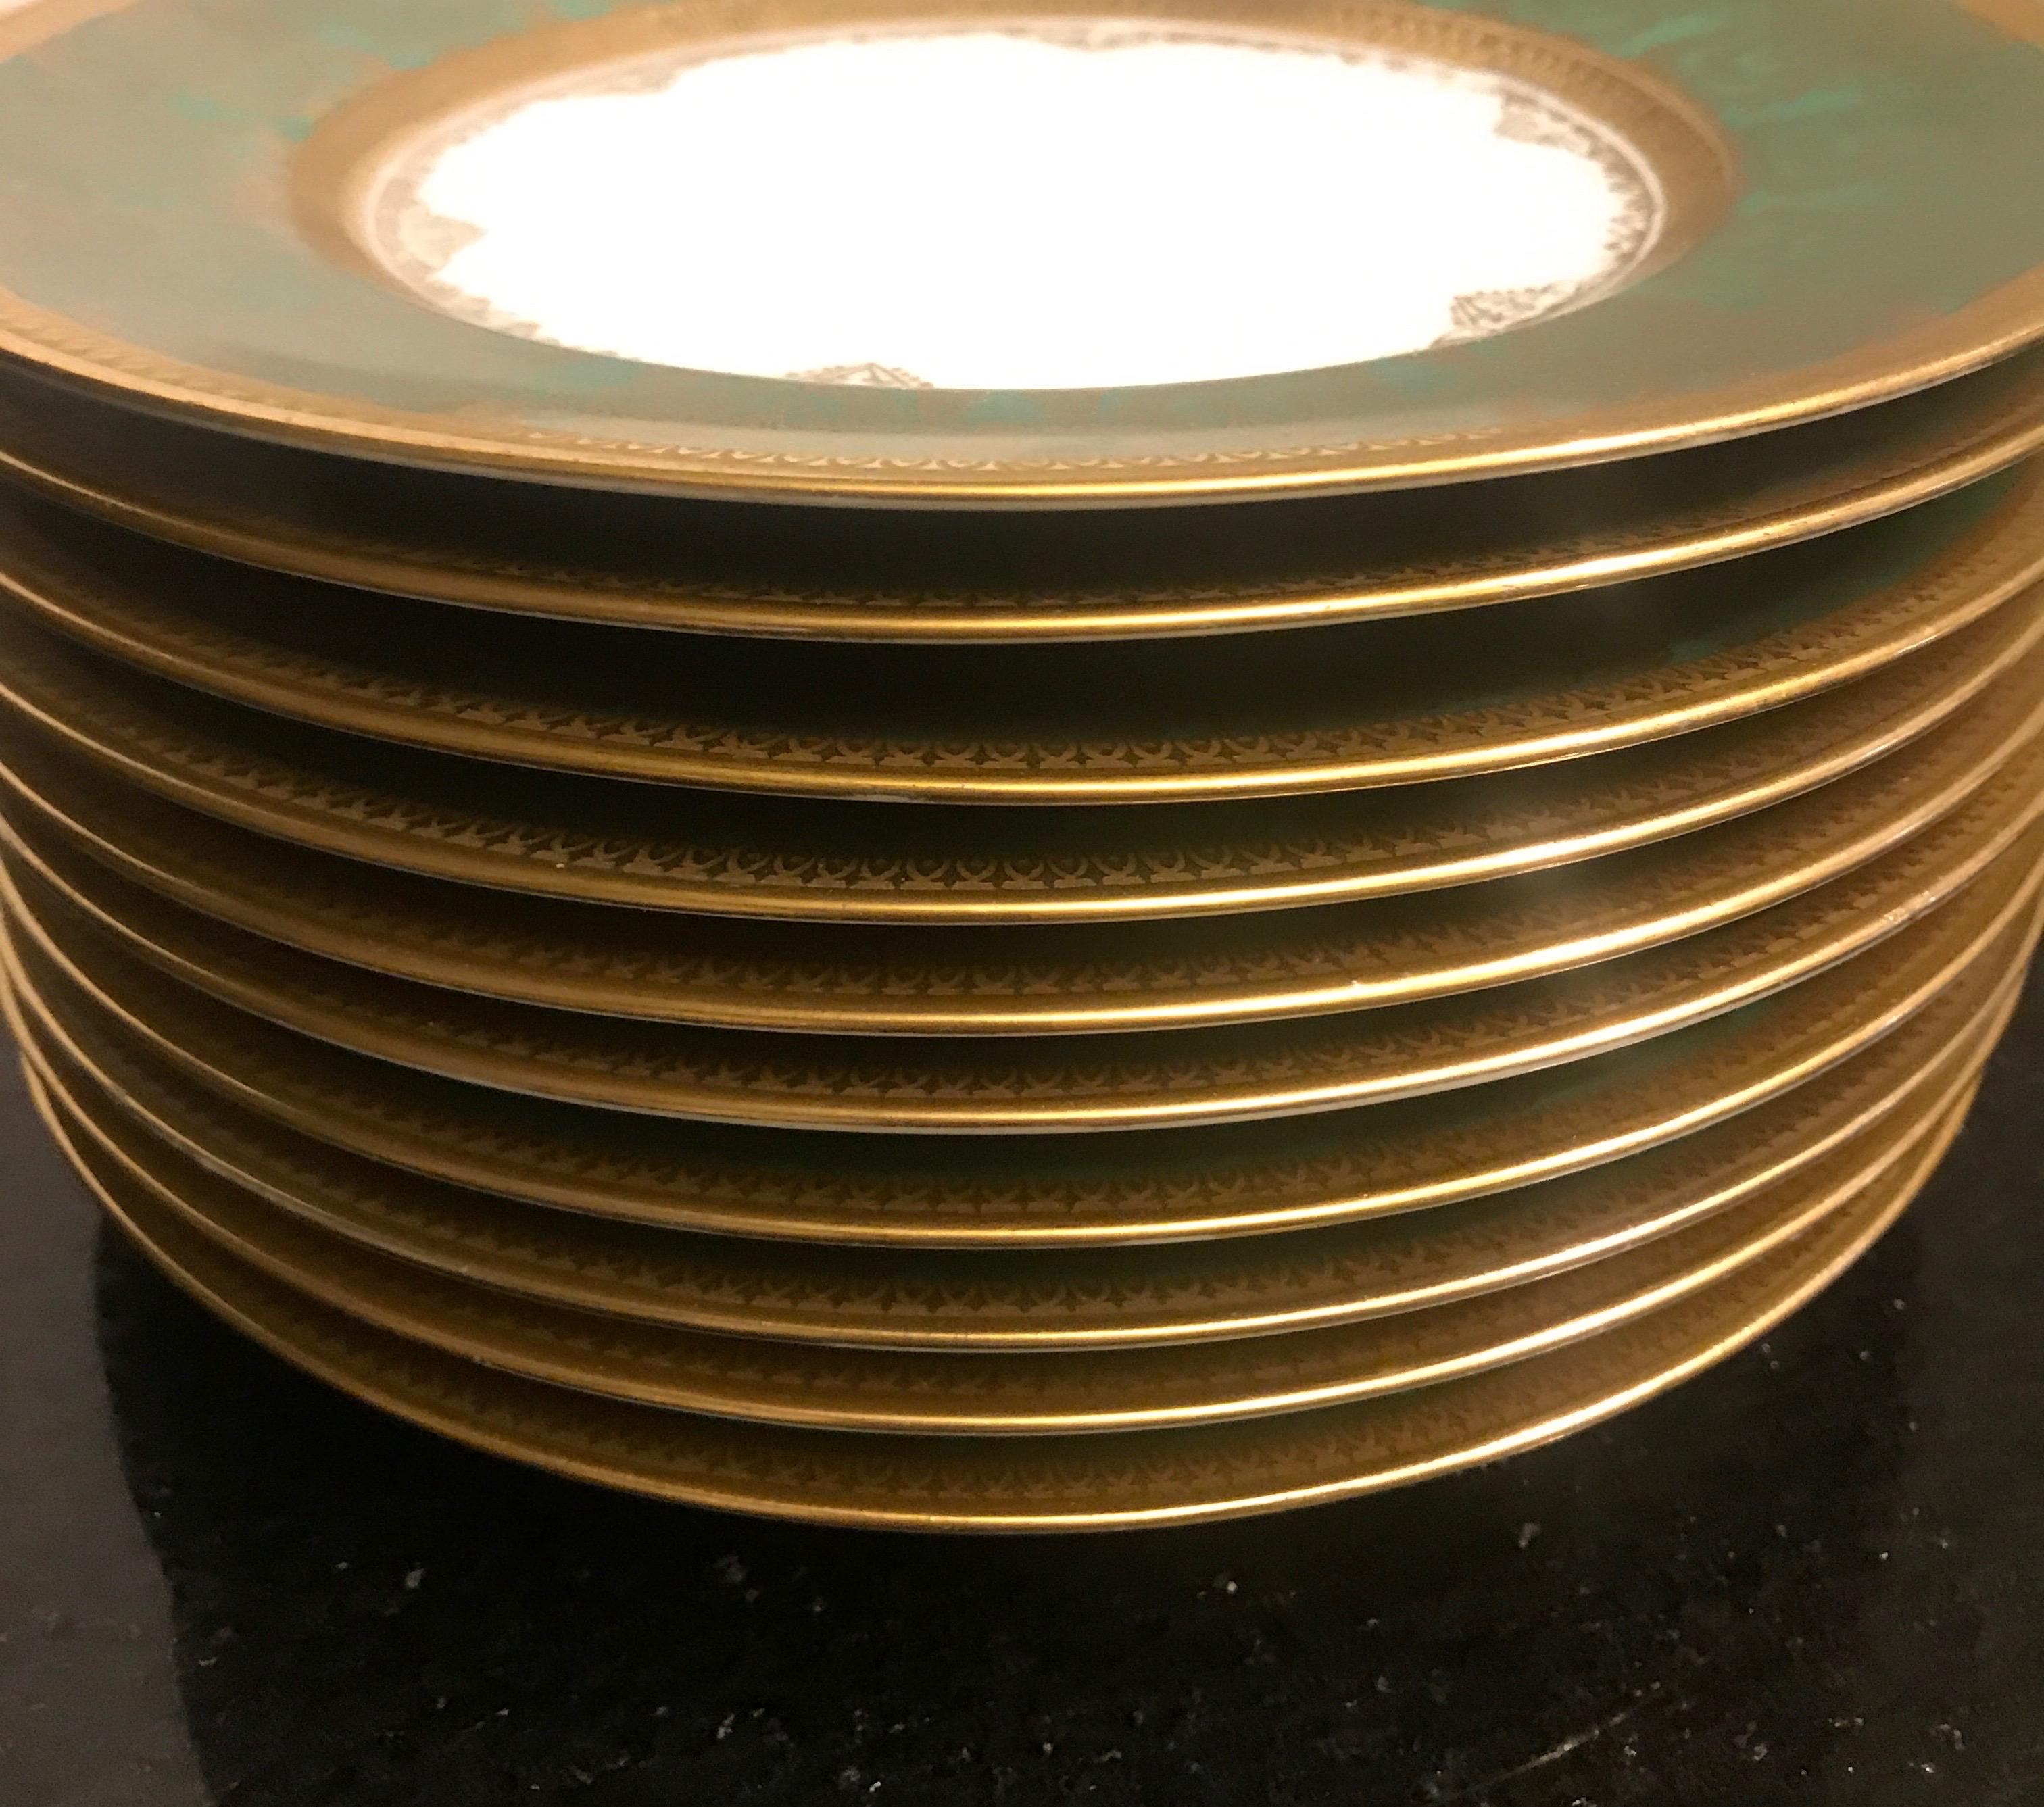 Set of 10 Green and Gold Encrusted Accent Plates, by Sommer & Matchak 1